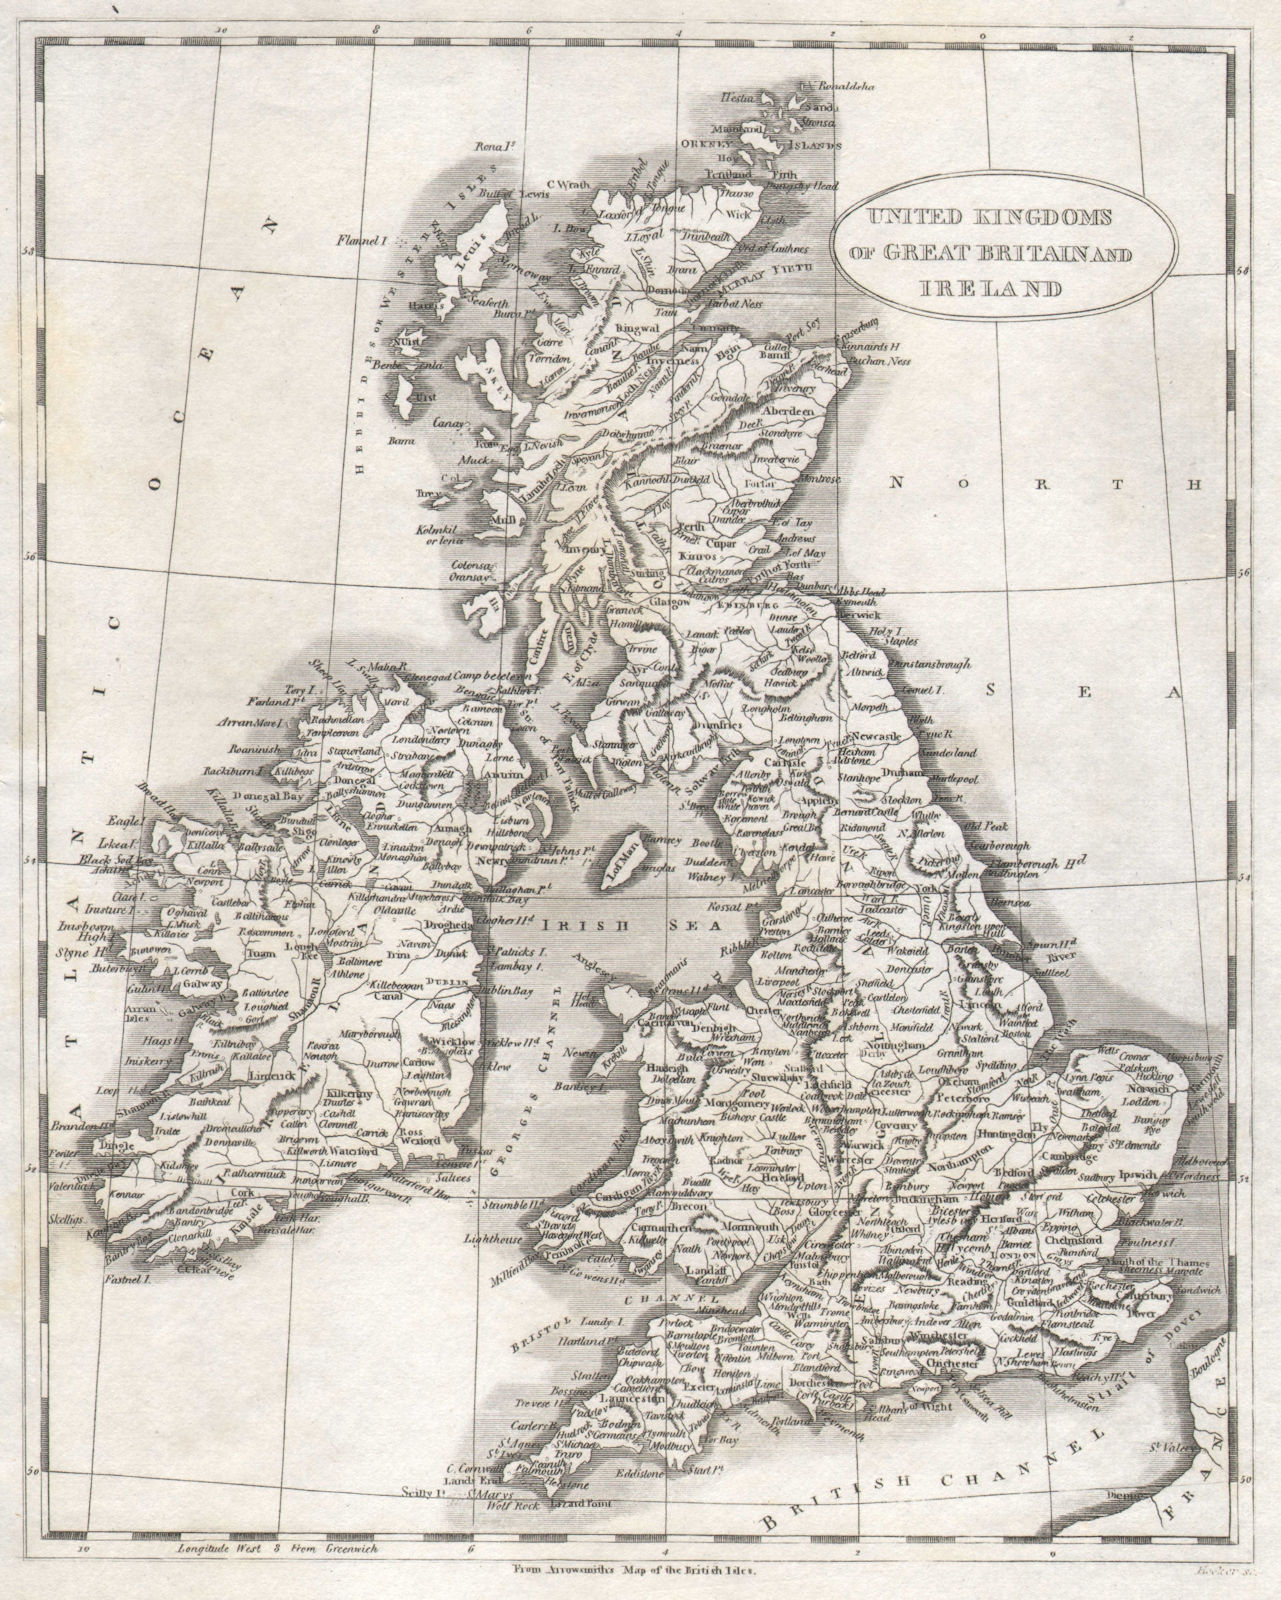 Associate Product United Kingdoms of Great Britain and Ireland by Arrowsmith & Lewis 1812 map